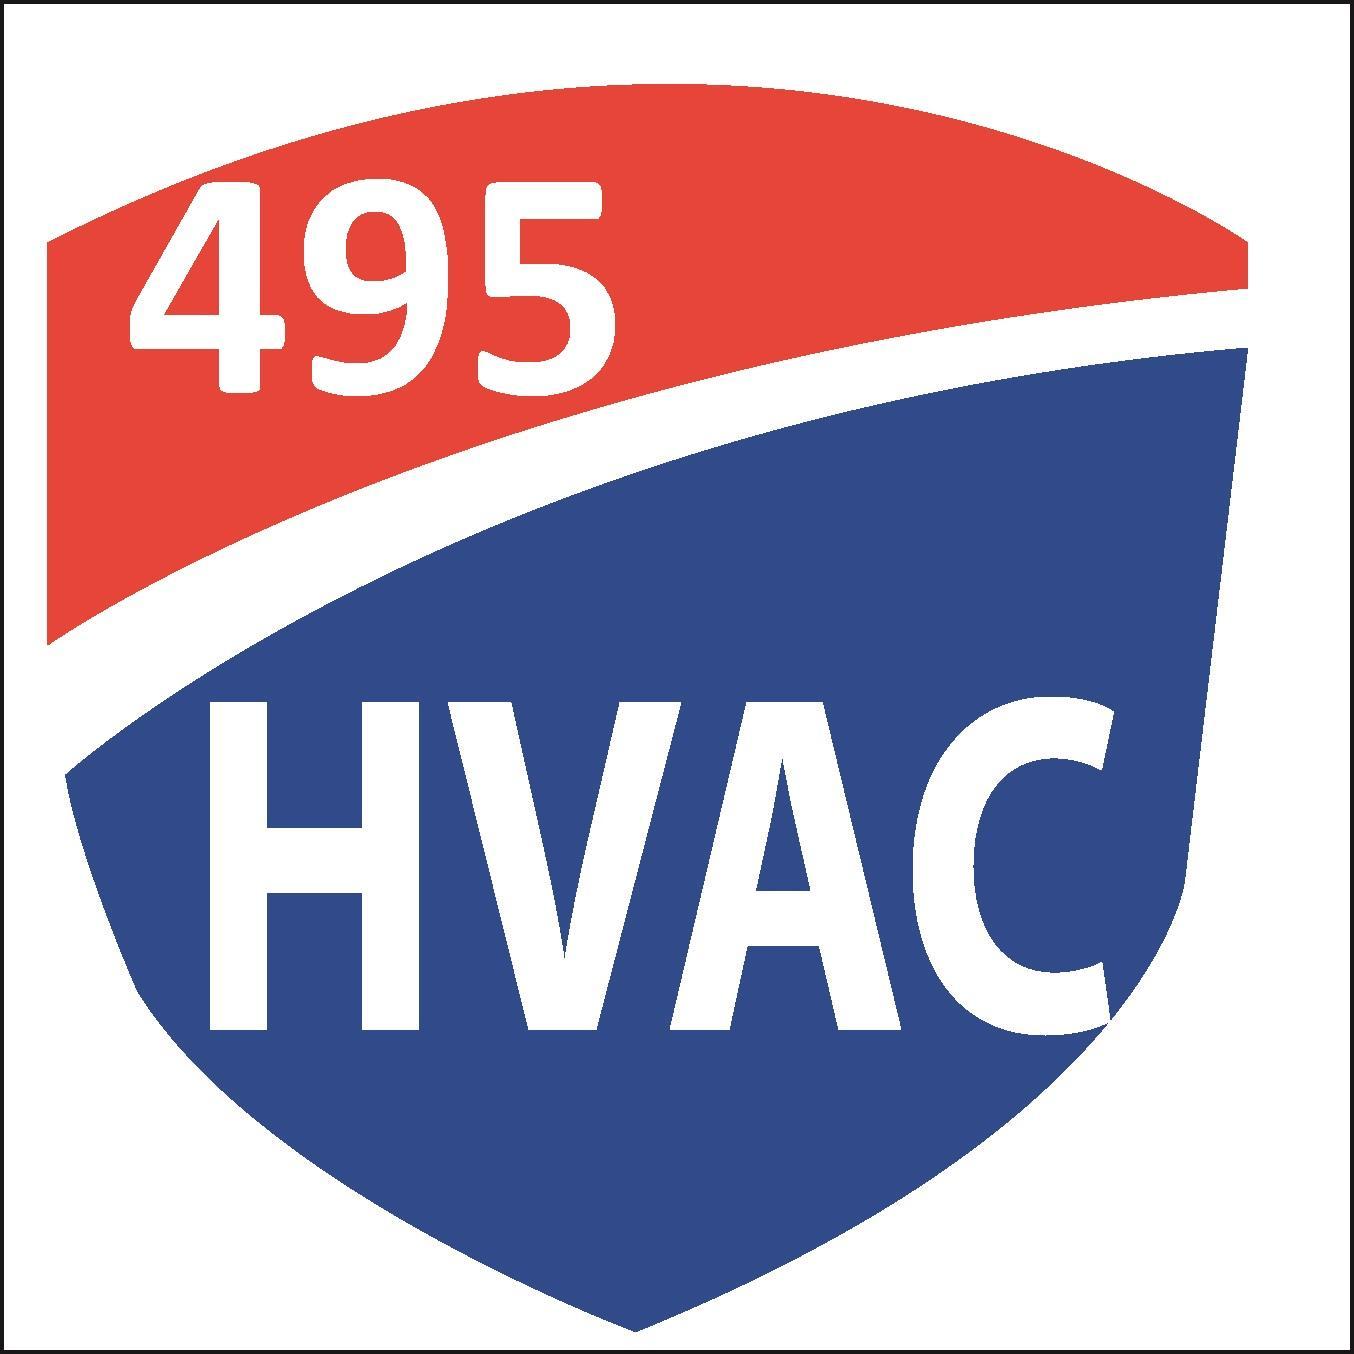 (703) 309-2328
495 HVAC is locally owned and operated in Alexandria, VA
Open Mon-Fri 8am-5pm. After-hour service M-F from 5:00pm-10pm, weekends 9am-10pm.